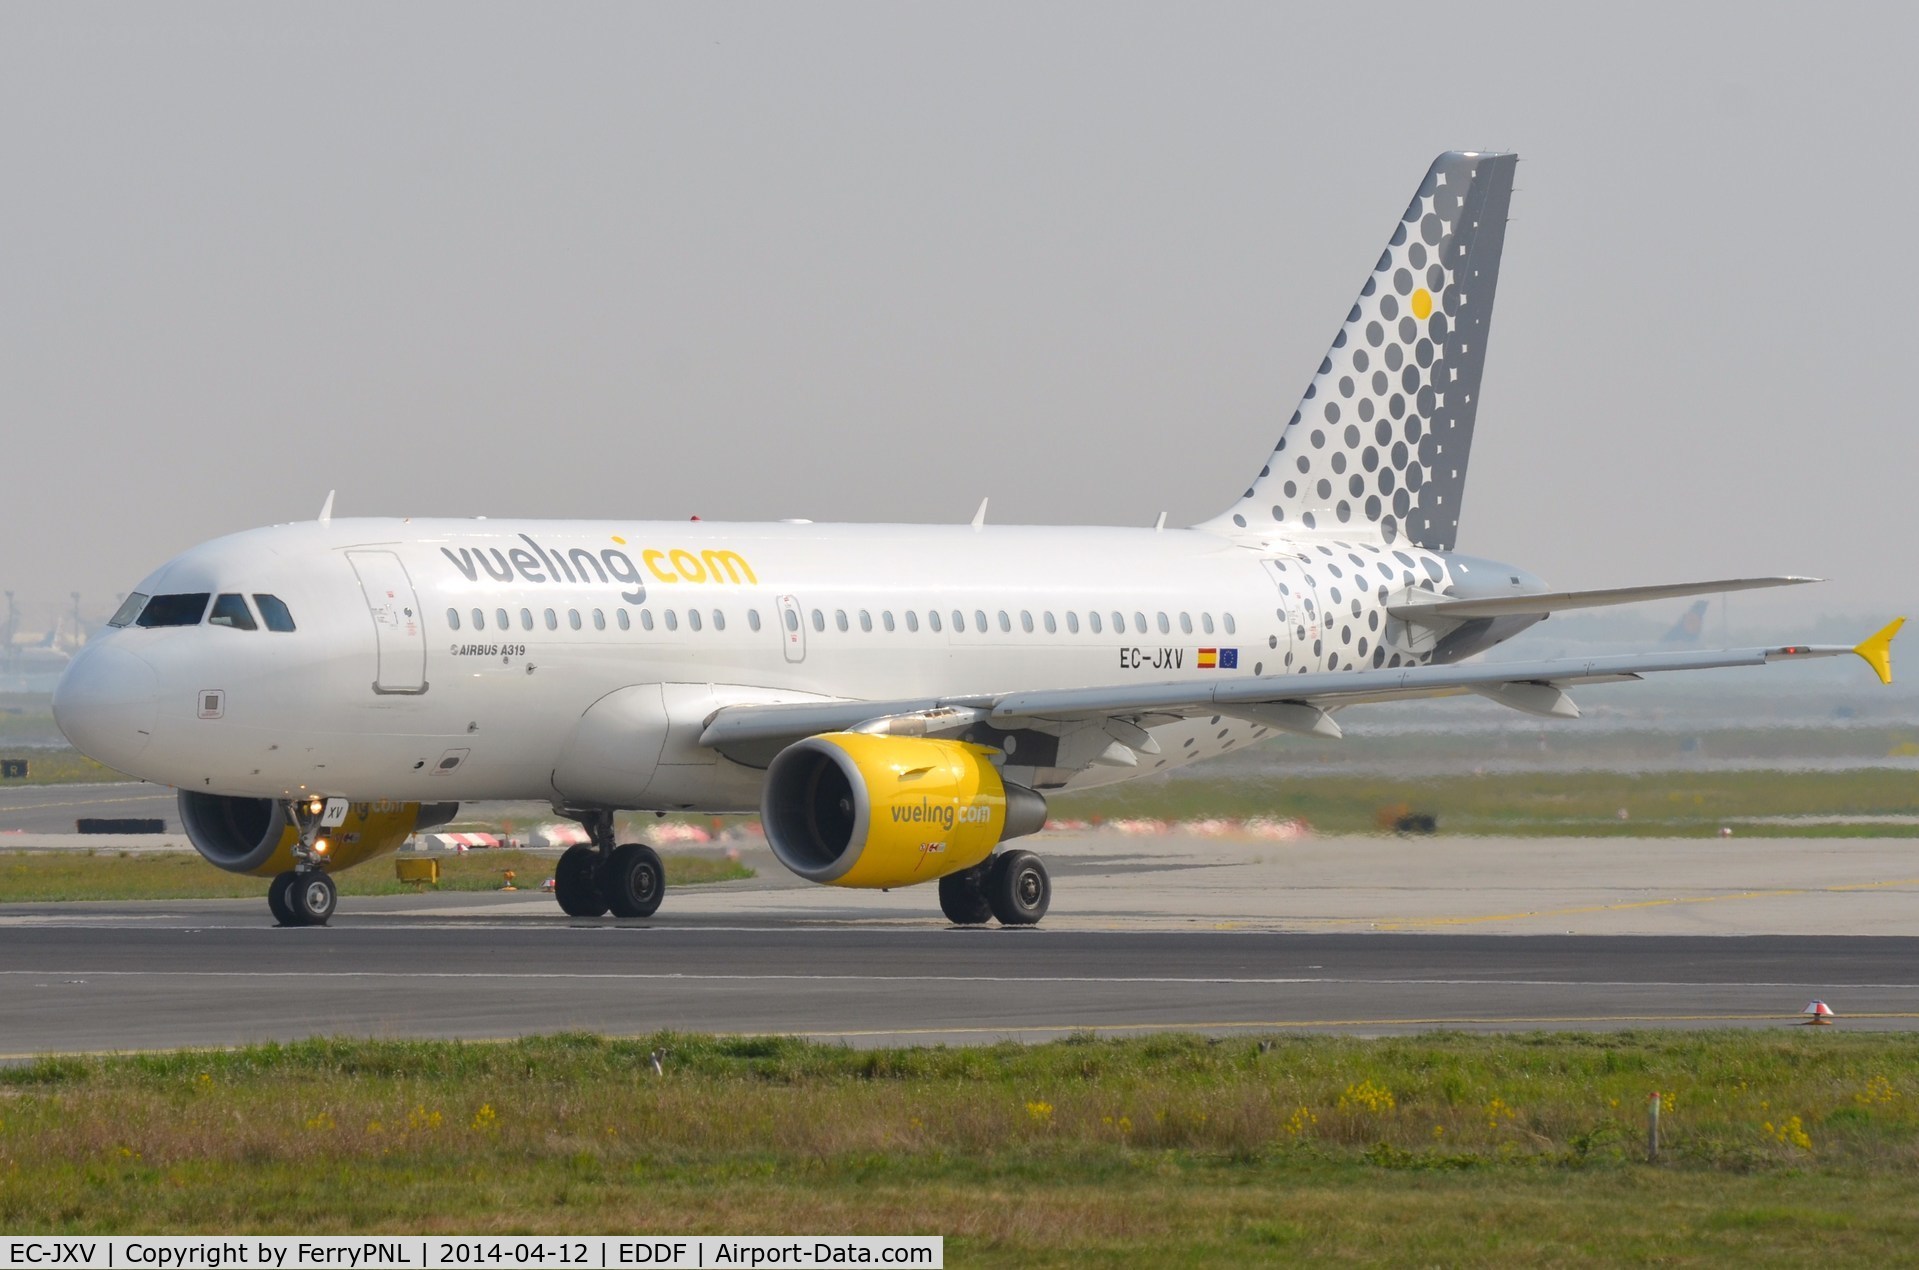 EC-JXV, 2006 Airbus A319-111 C/N 2897, Former Iberia A319 now operating for Vueling.